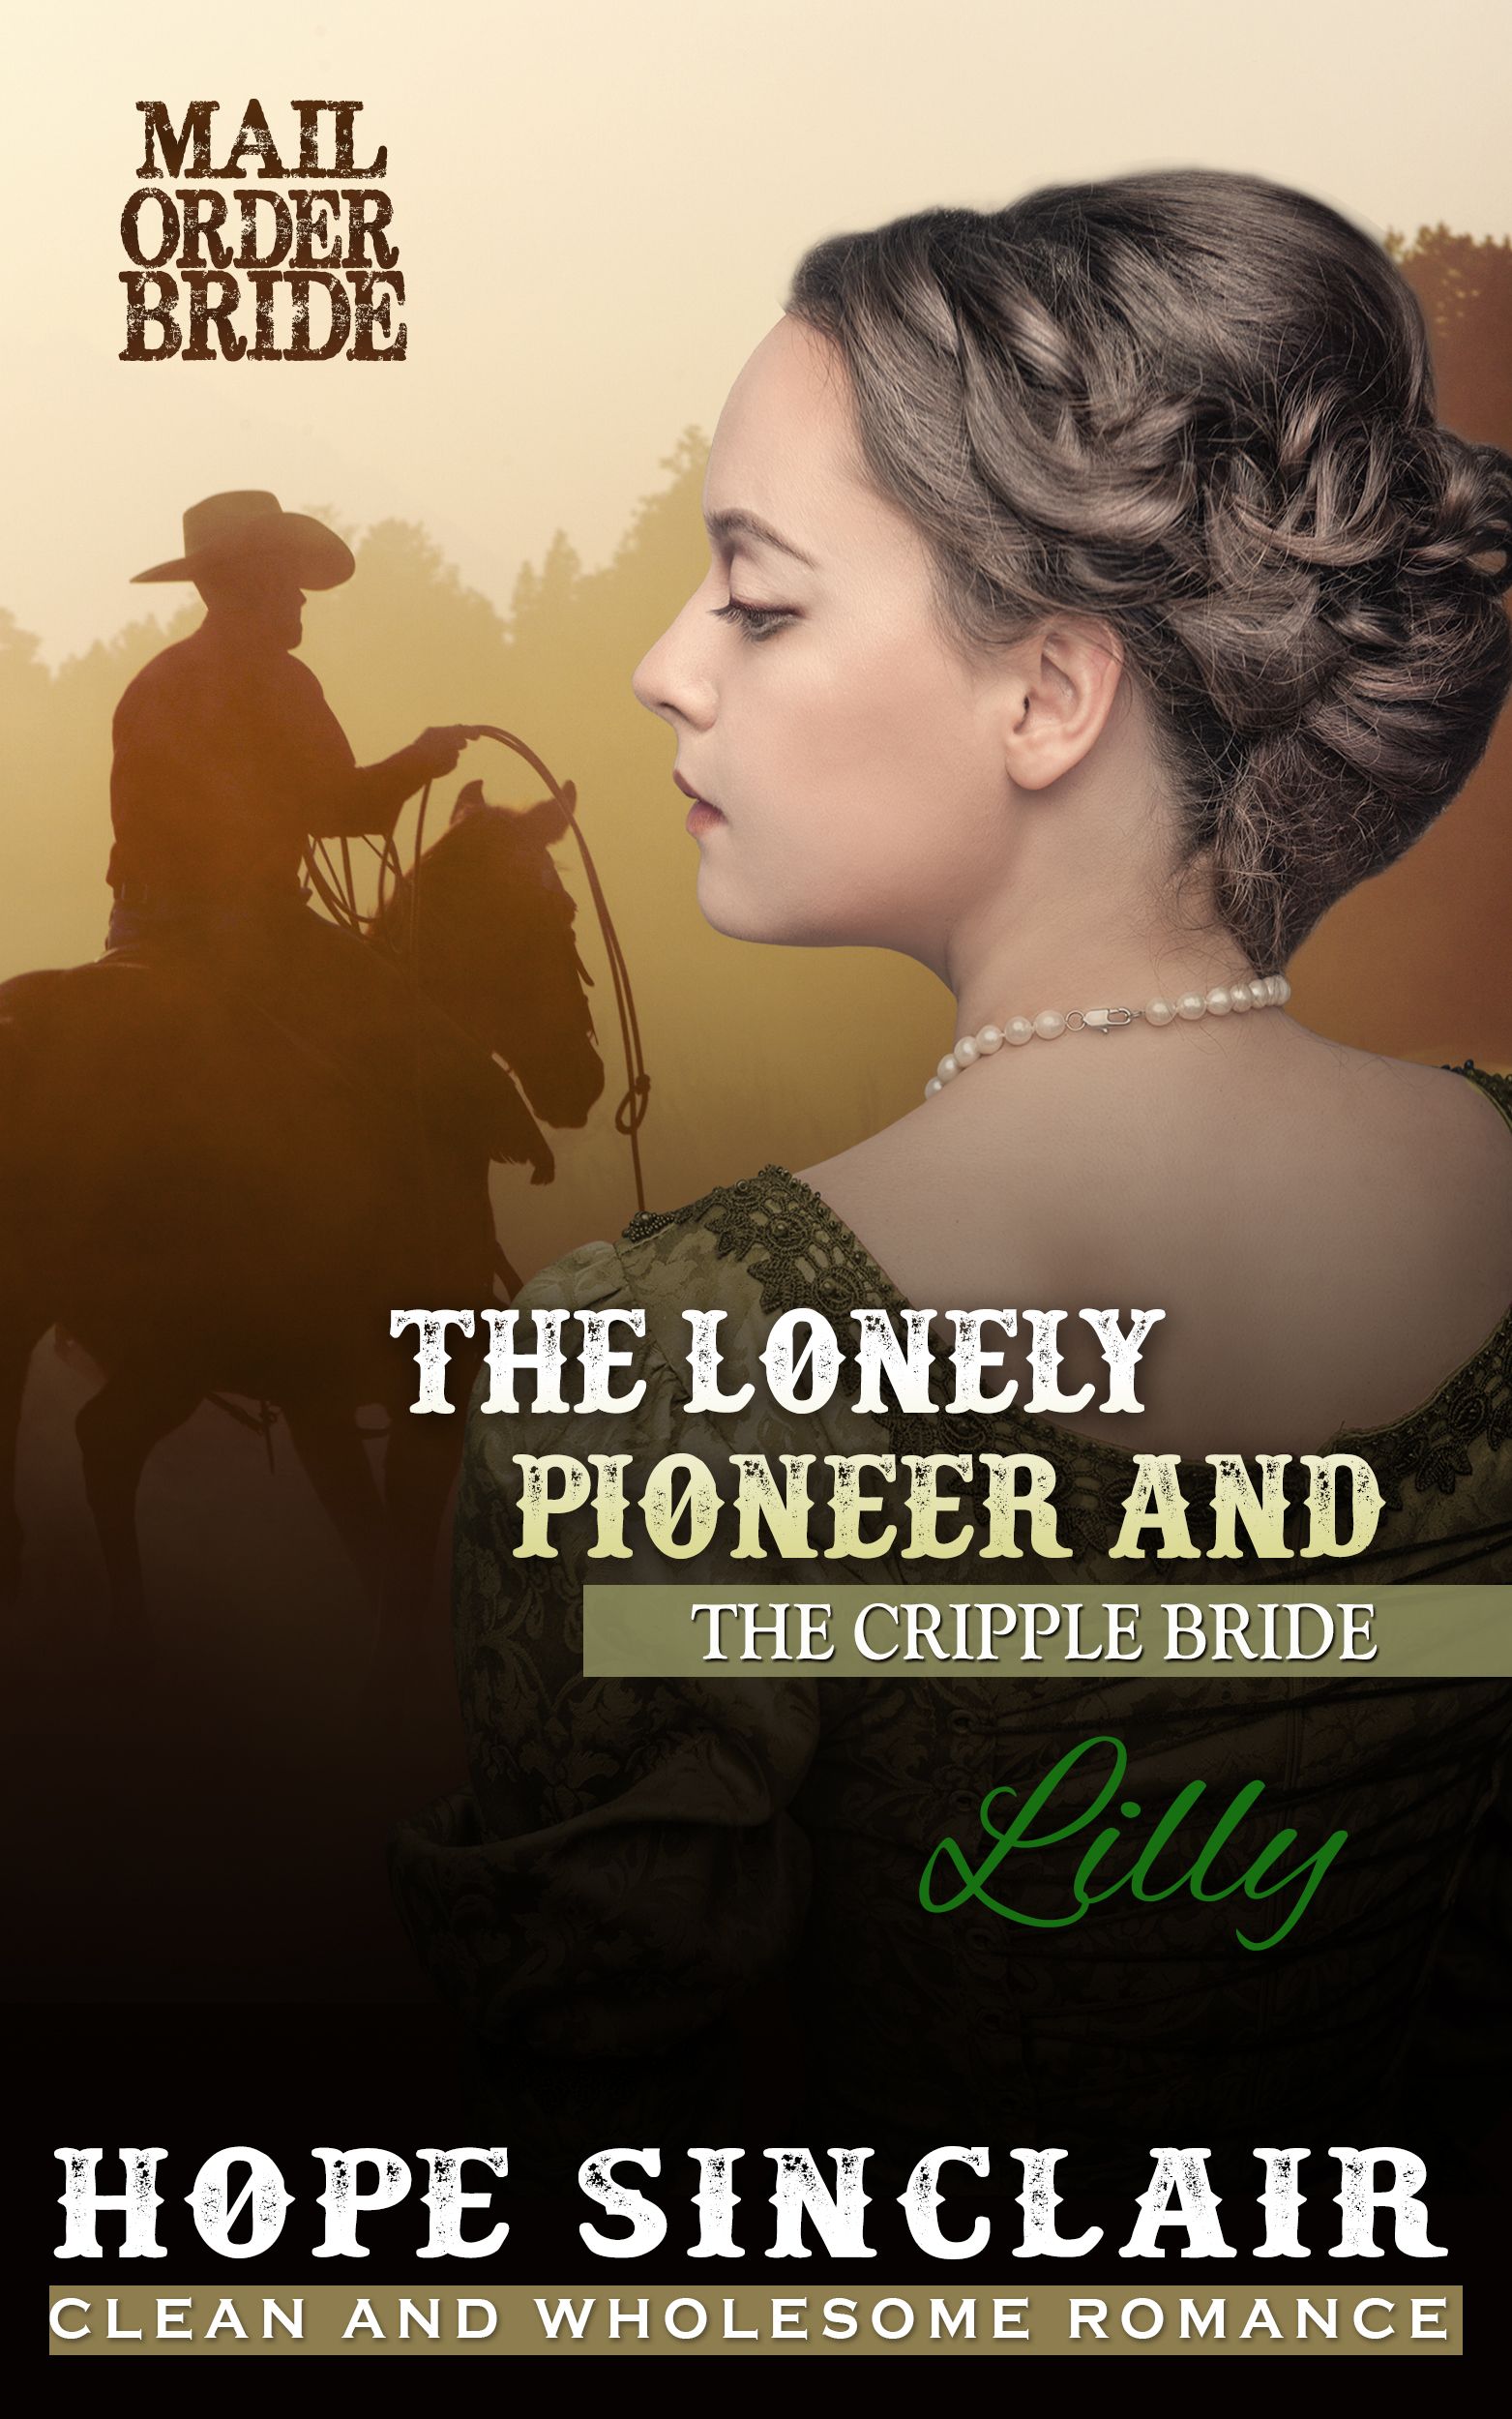 Mail Order Bride: The Lonely Pioneer and The Cripple Bride - LILLY (A Clean Western Historical Romance) (Mail Order Bride Agency Book 1)'s Book Image